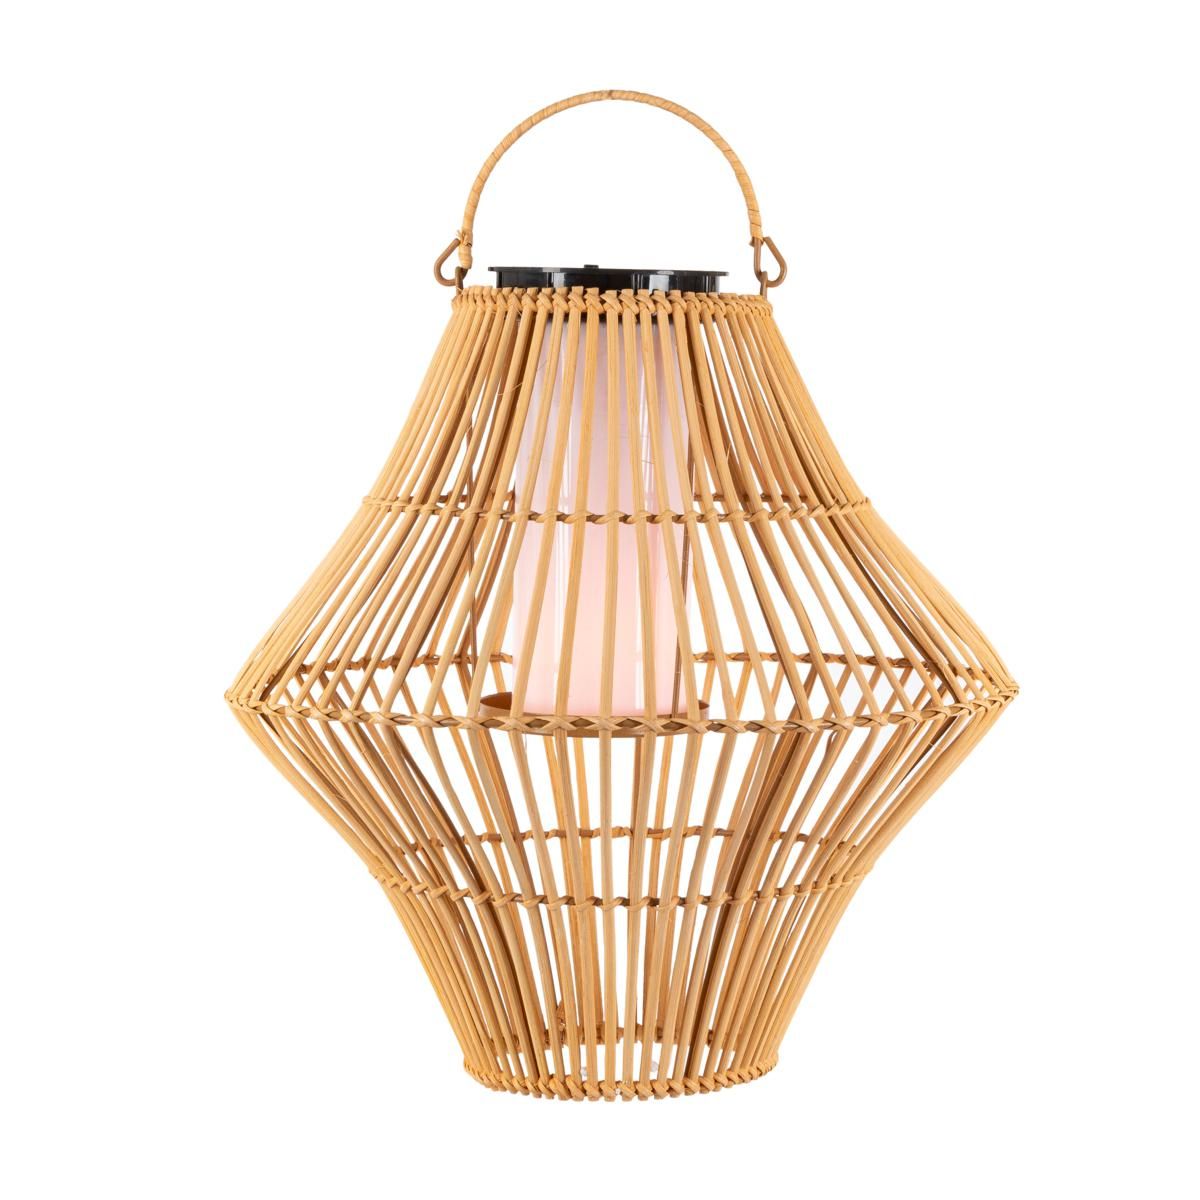 The Gerson Co. 13.8" Hanging Solar Flame Effect Bamboo Pendant Light - 20111977 | HSN | HSN